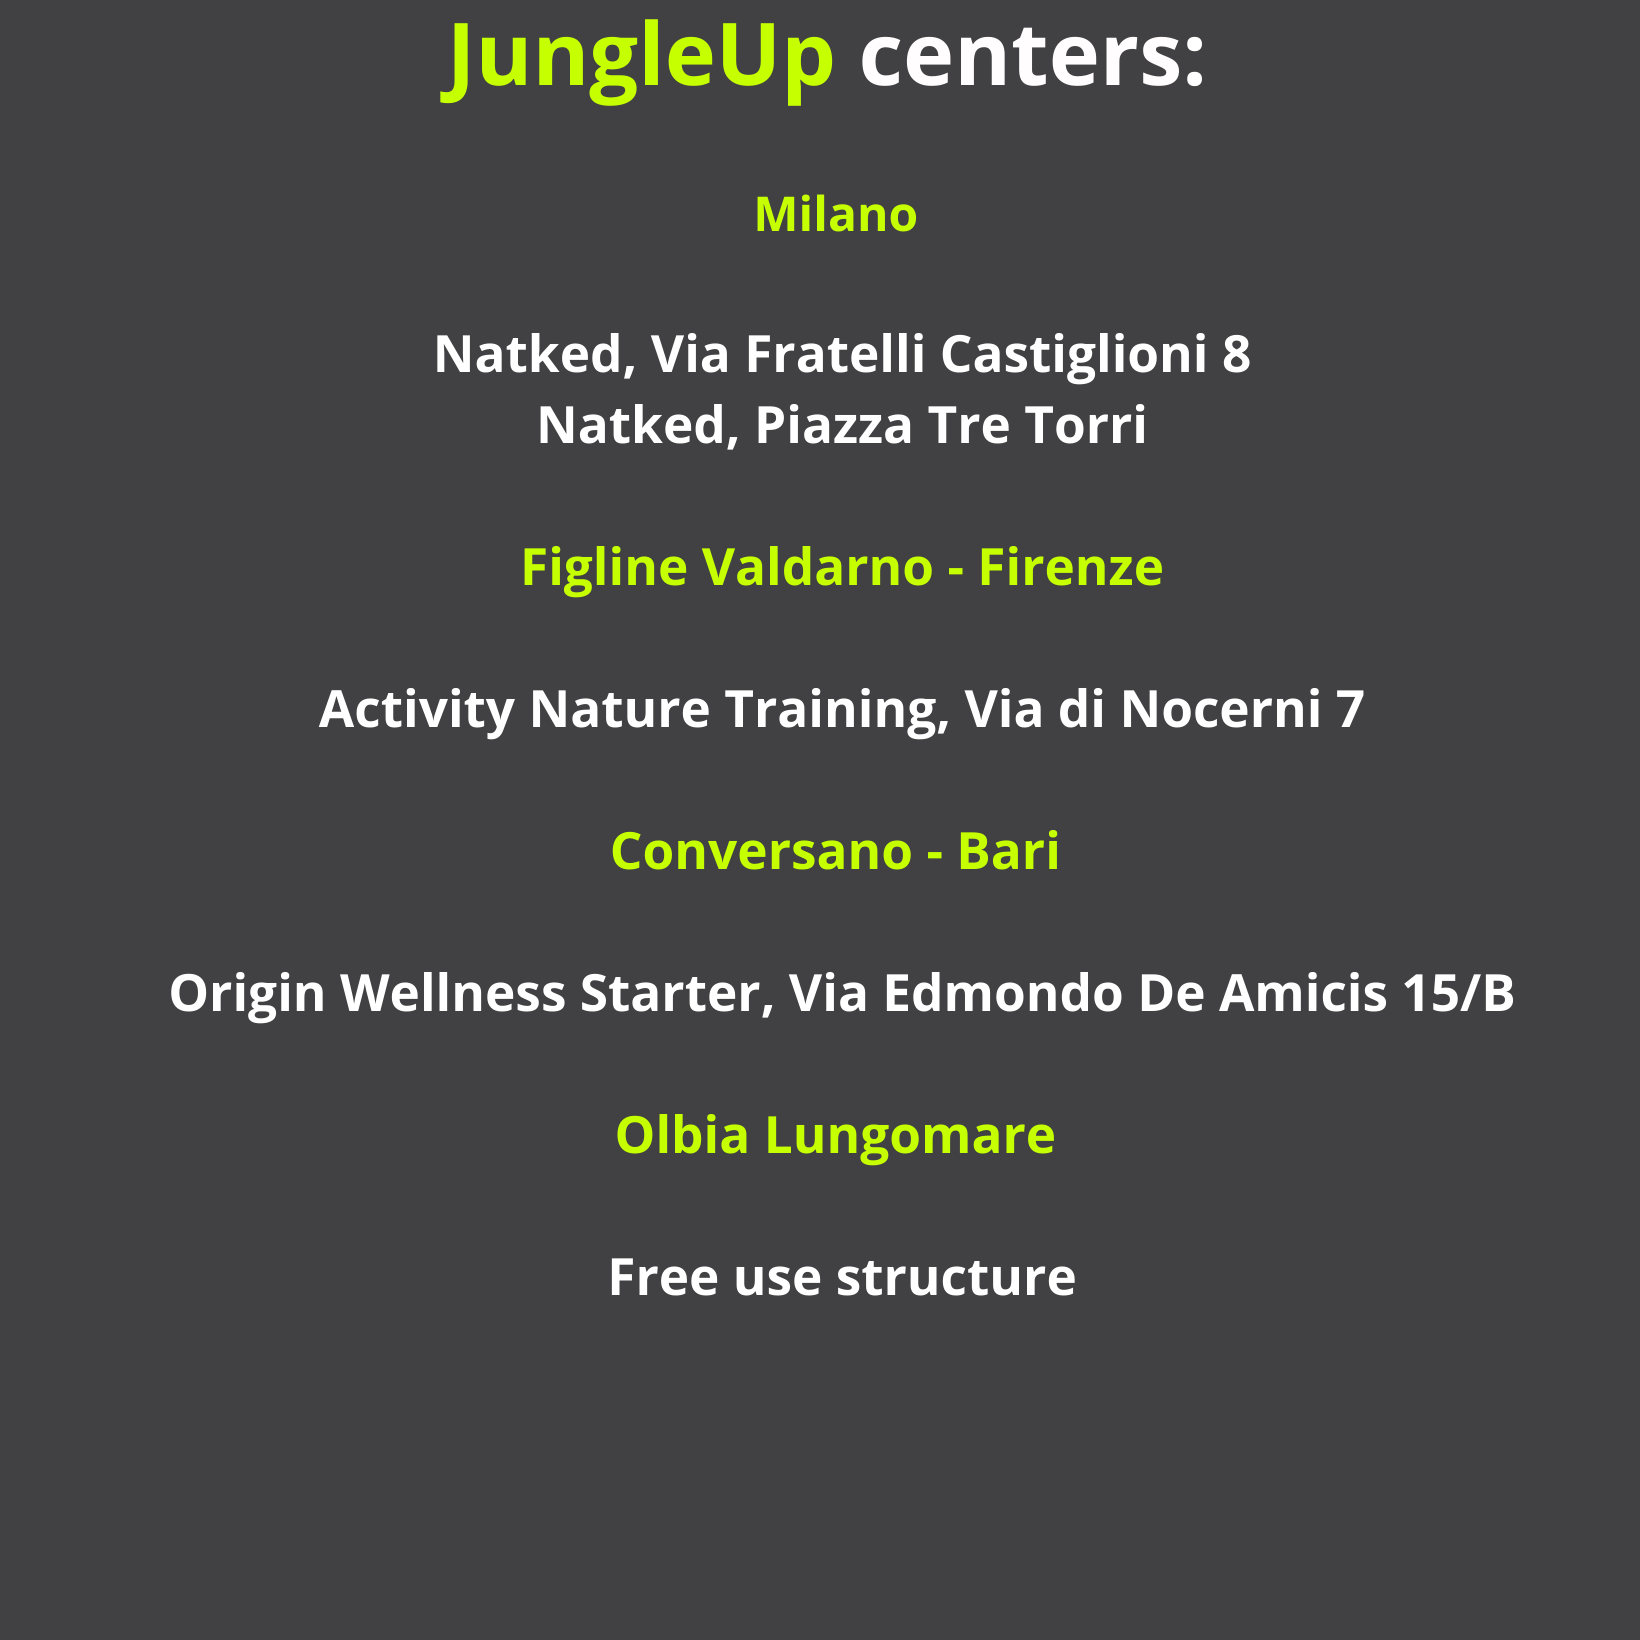 Complete list off all JungleUp centers and affiliated gym.